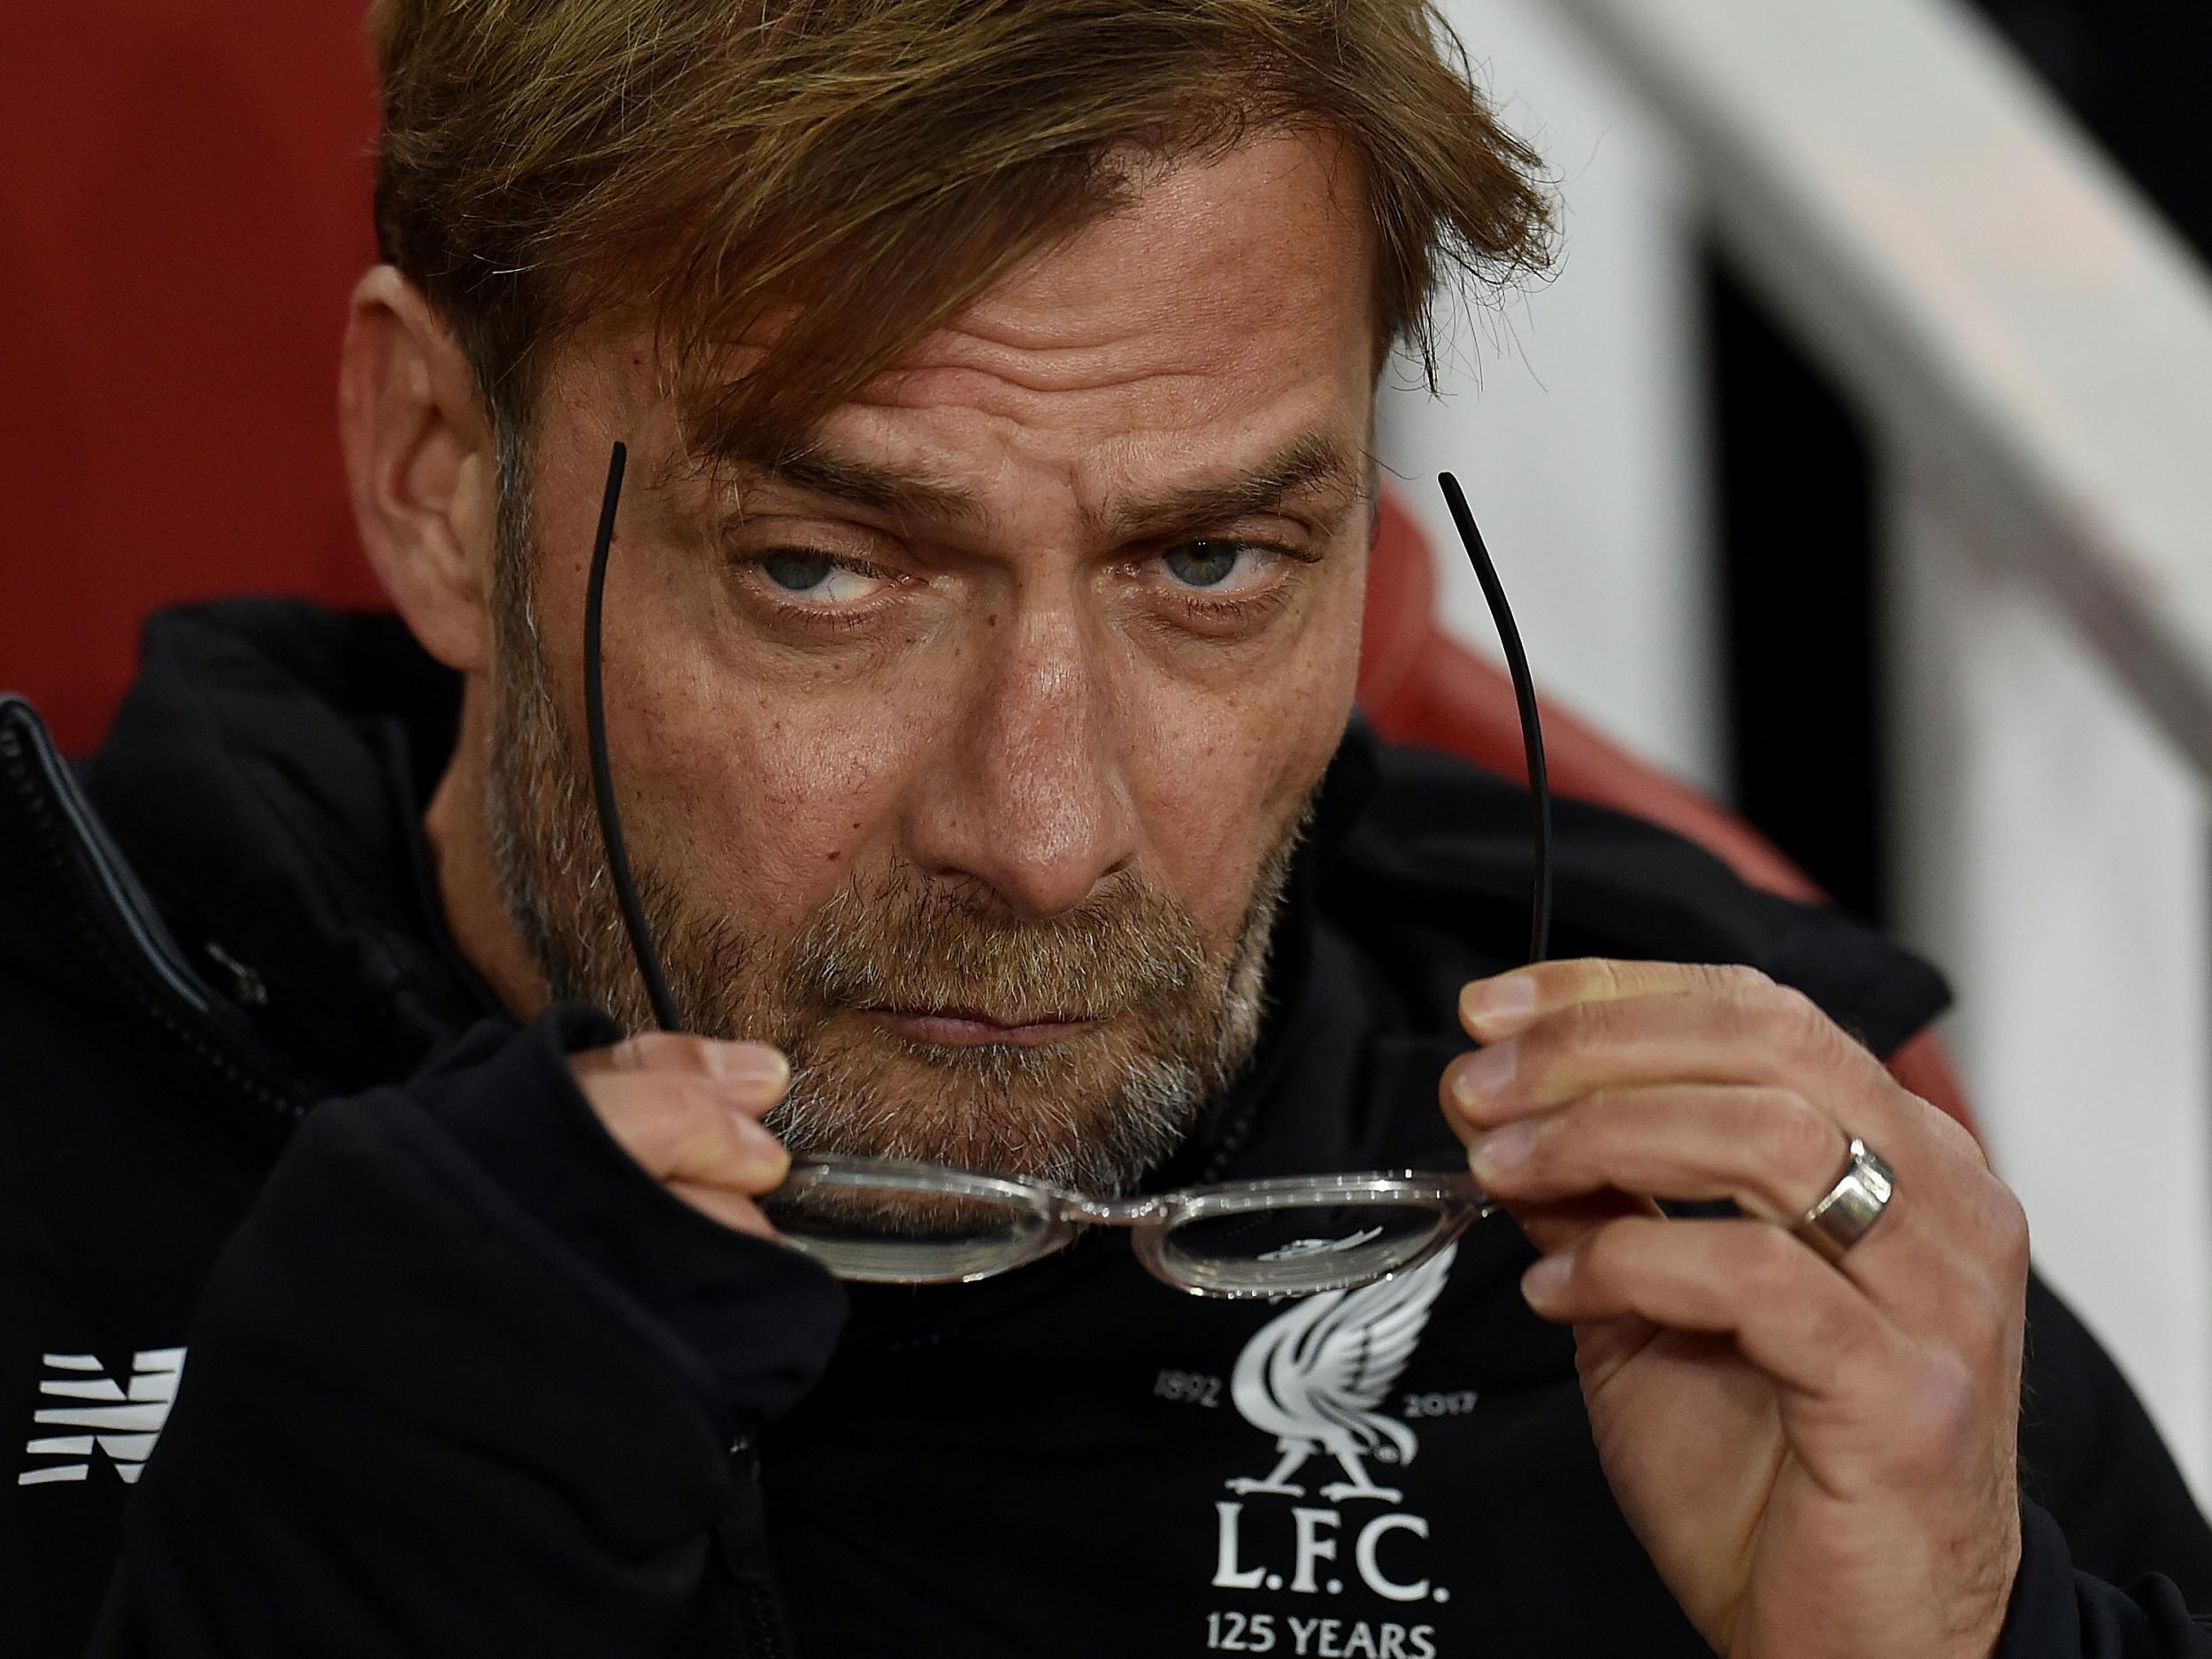 Jürgen Klopp's side have drawn eight of their opening 19 games this season